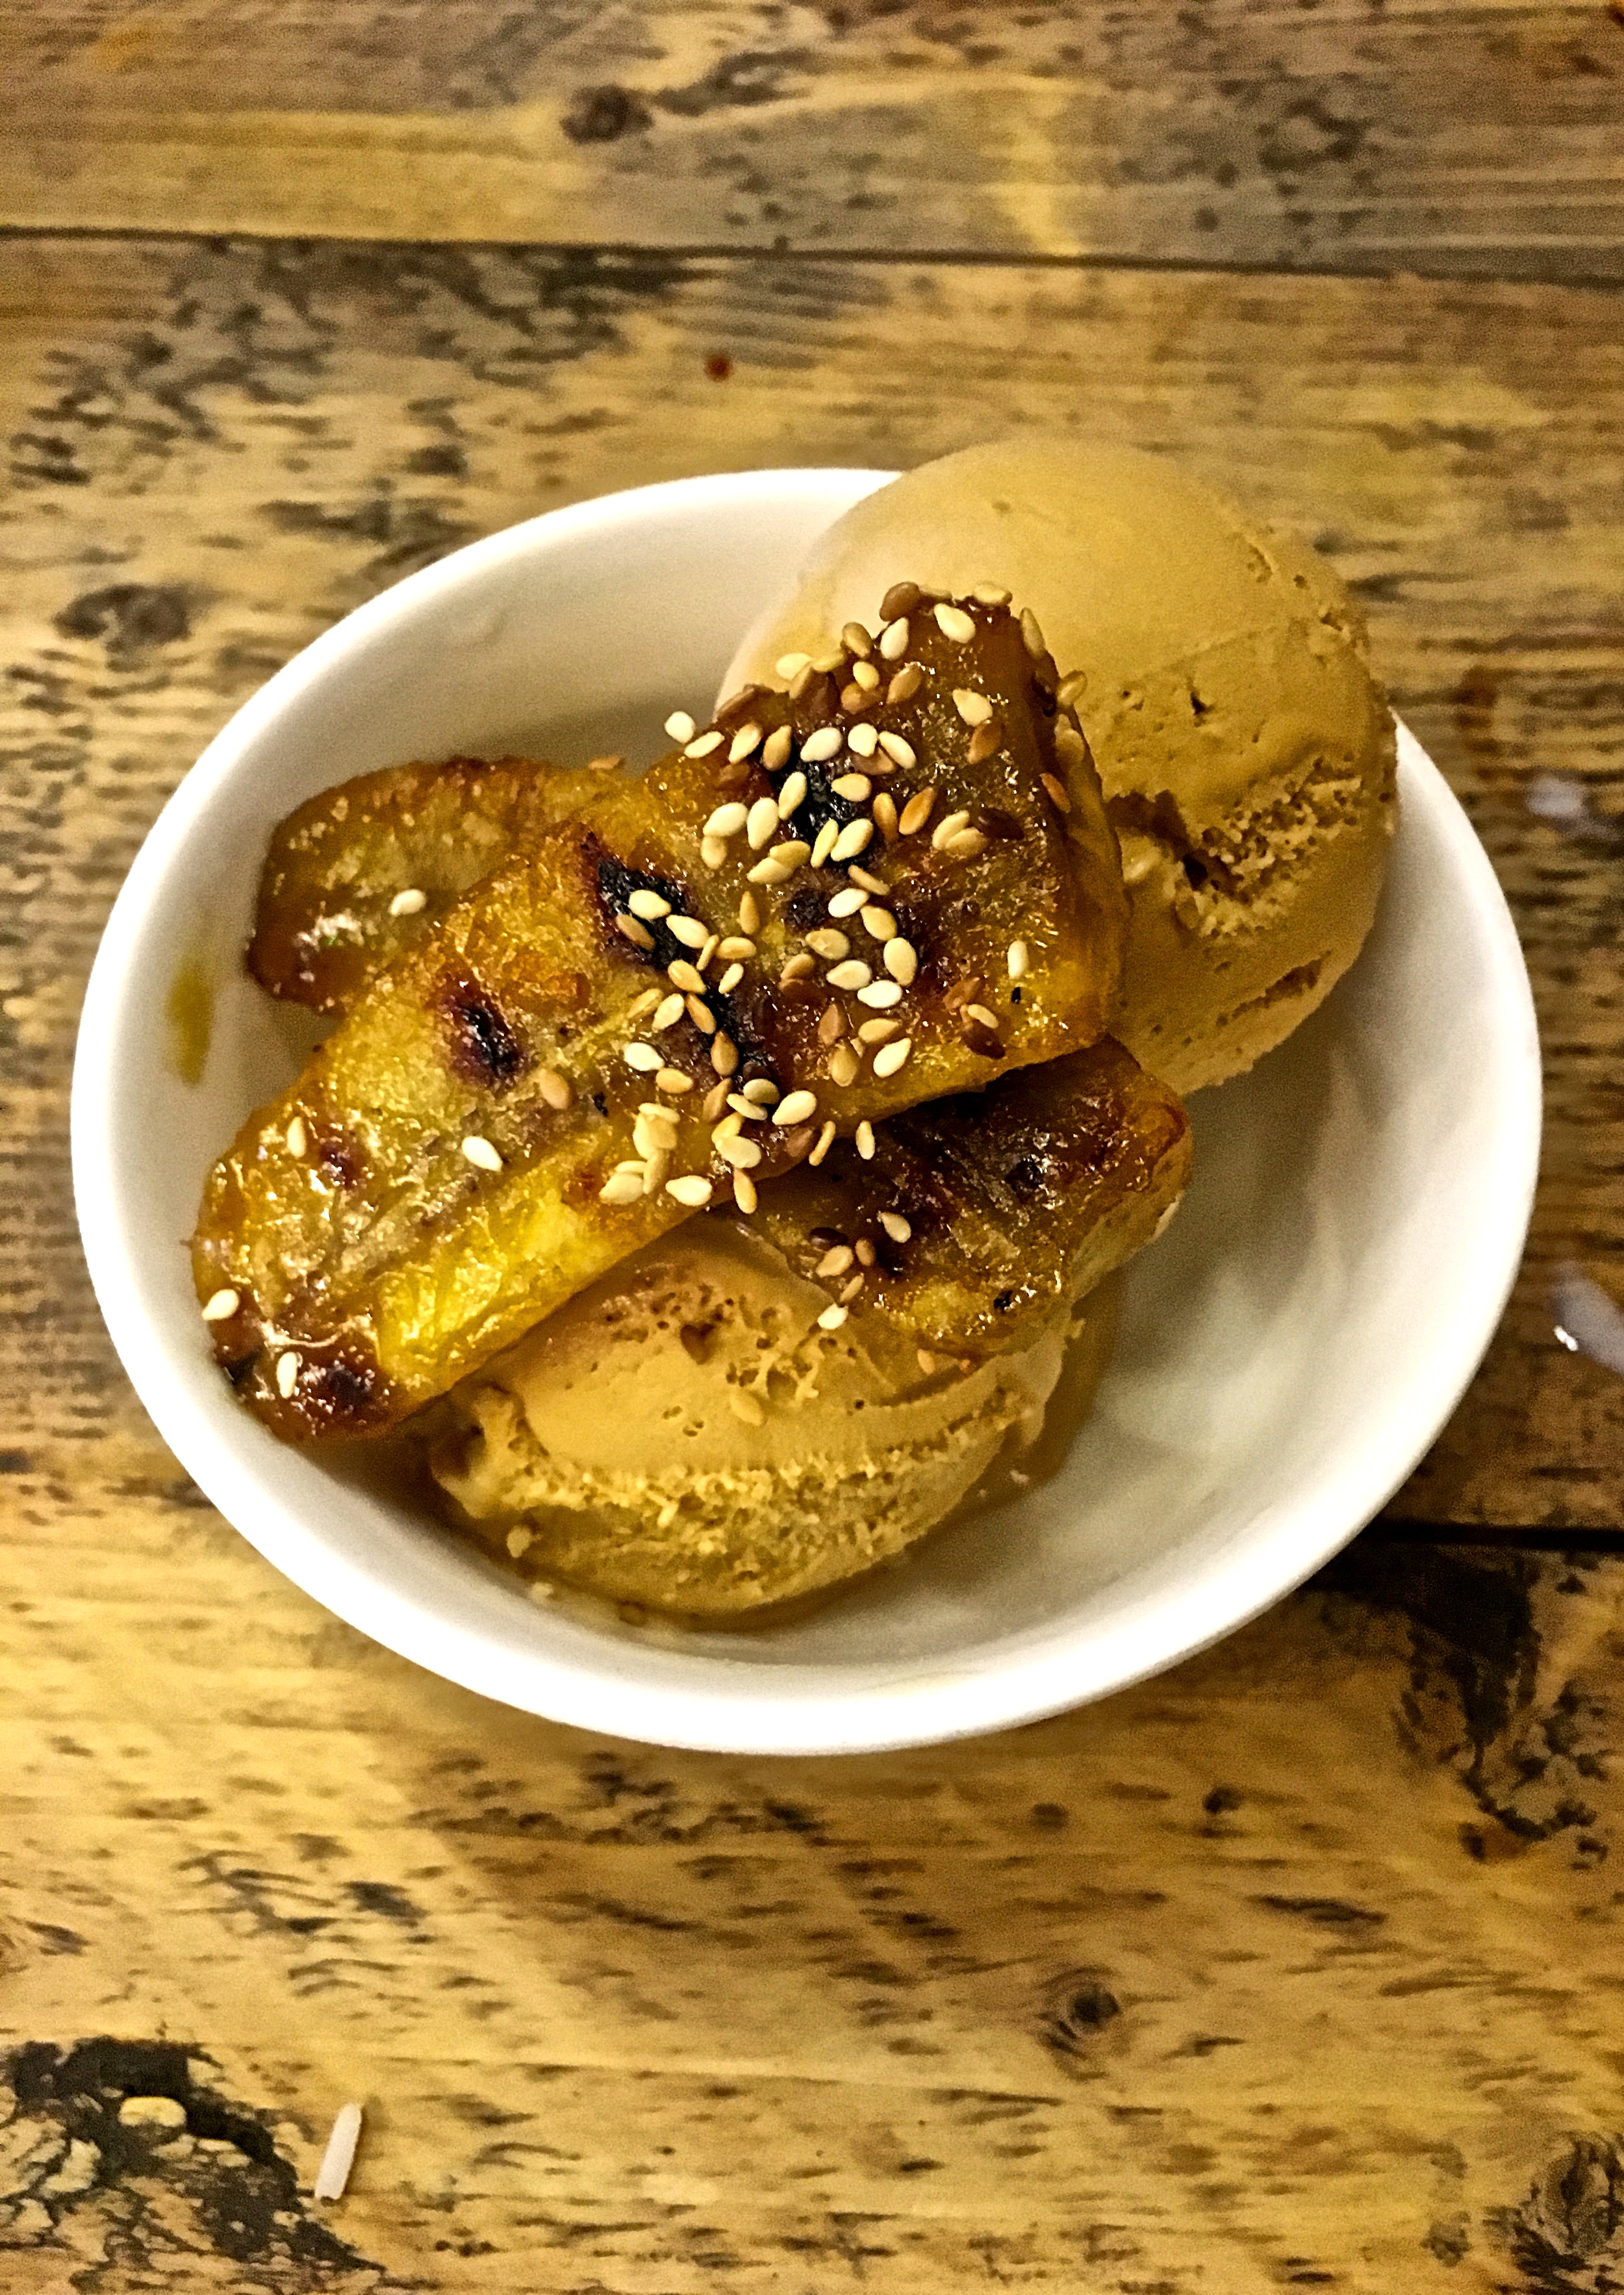 Salted Palm Sugar Ice Cream with Tumeric Grilled Banana